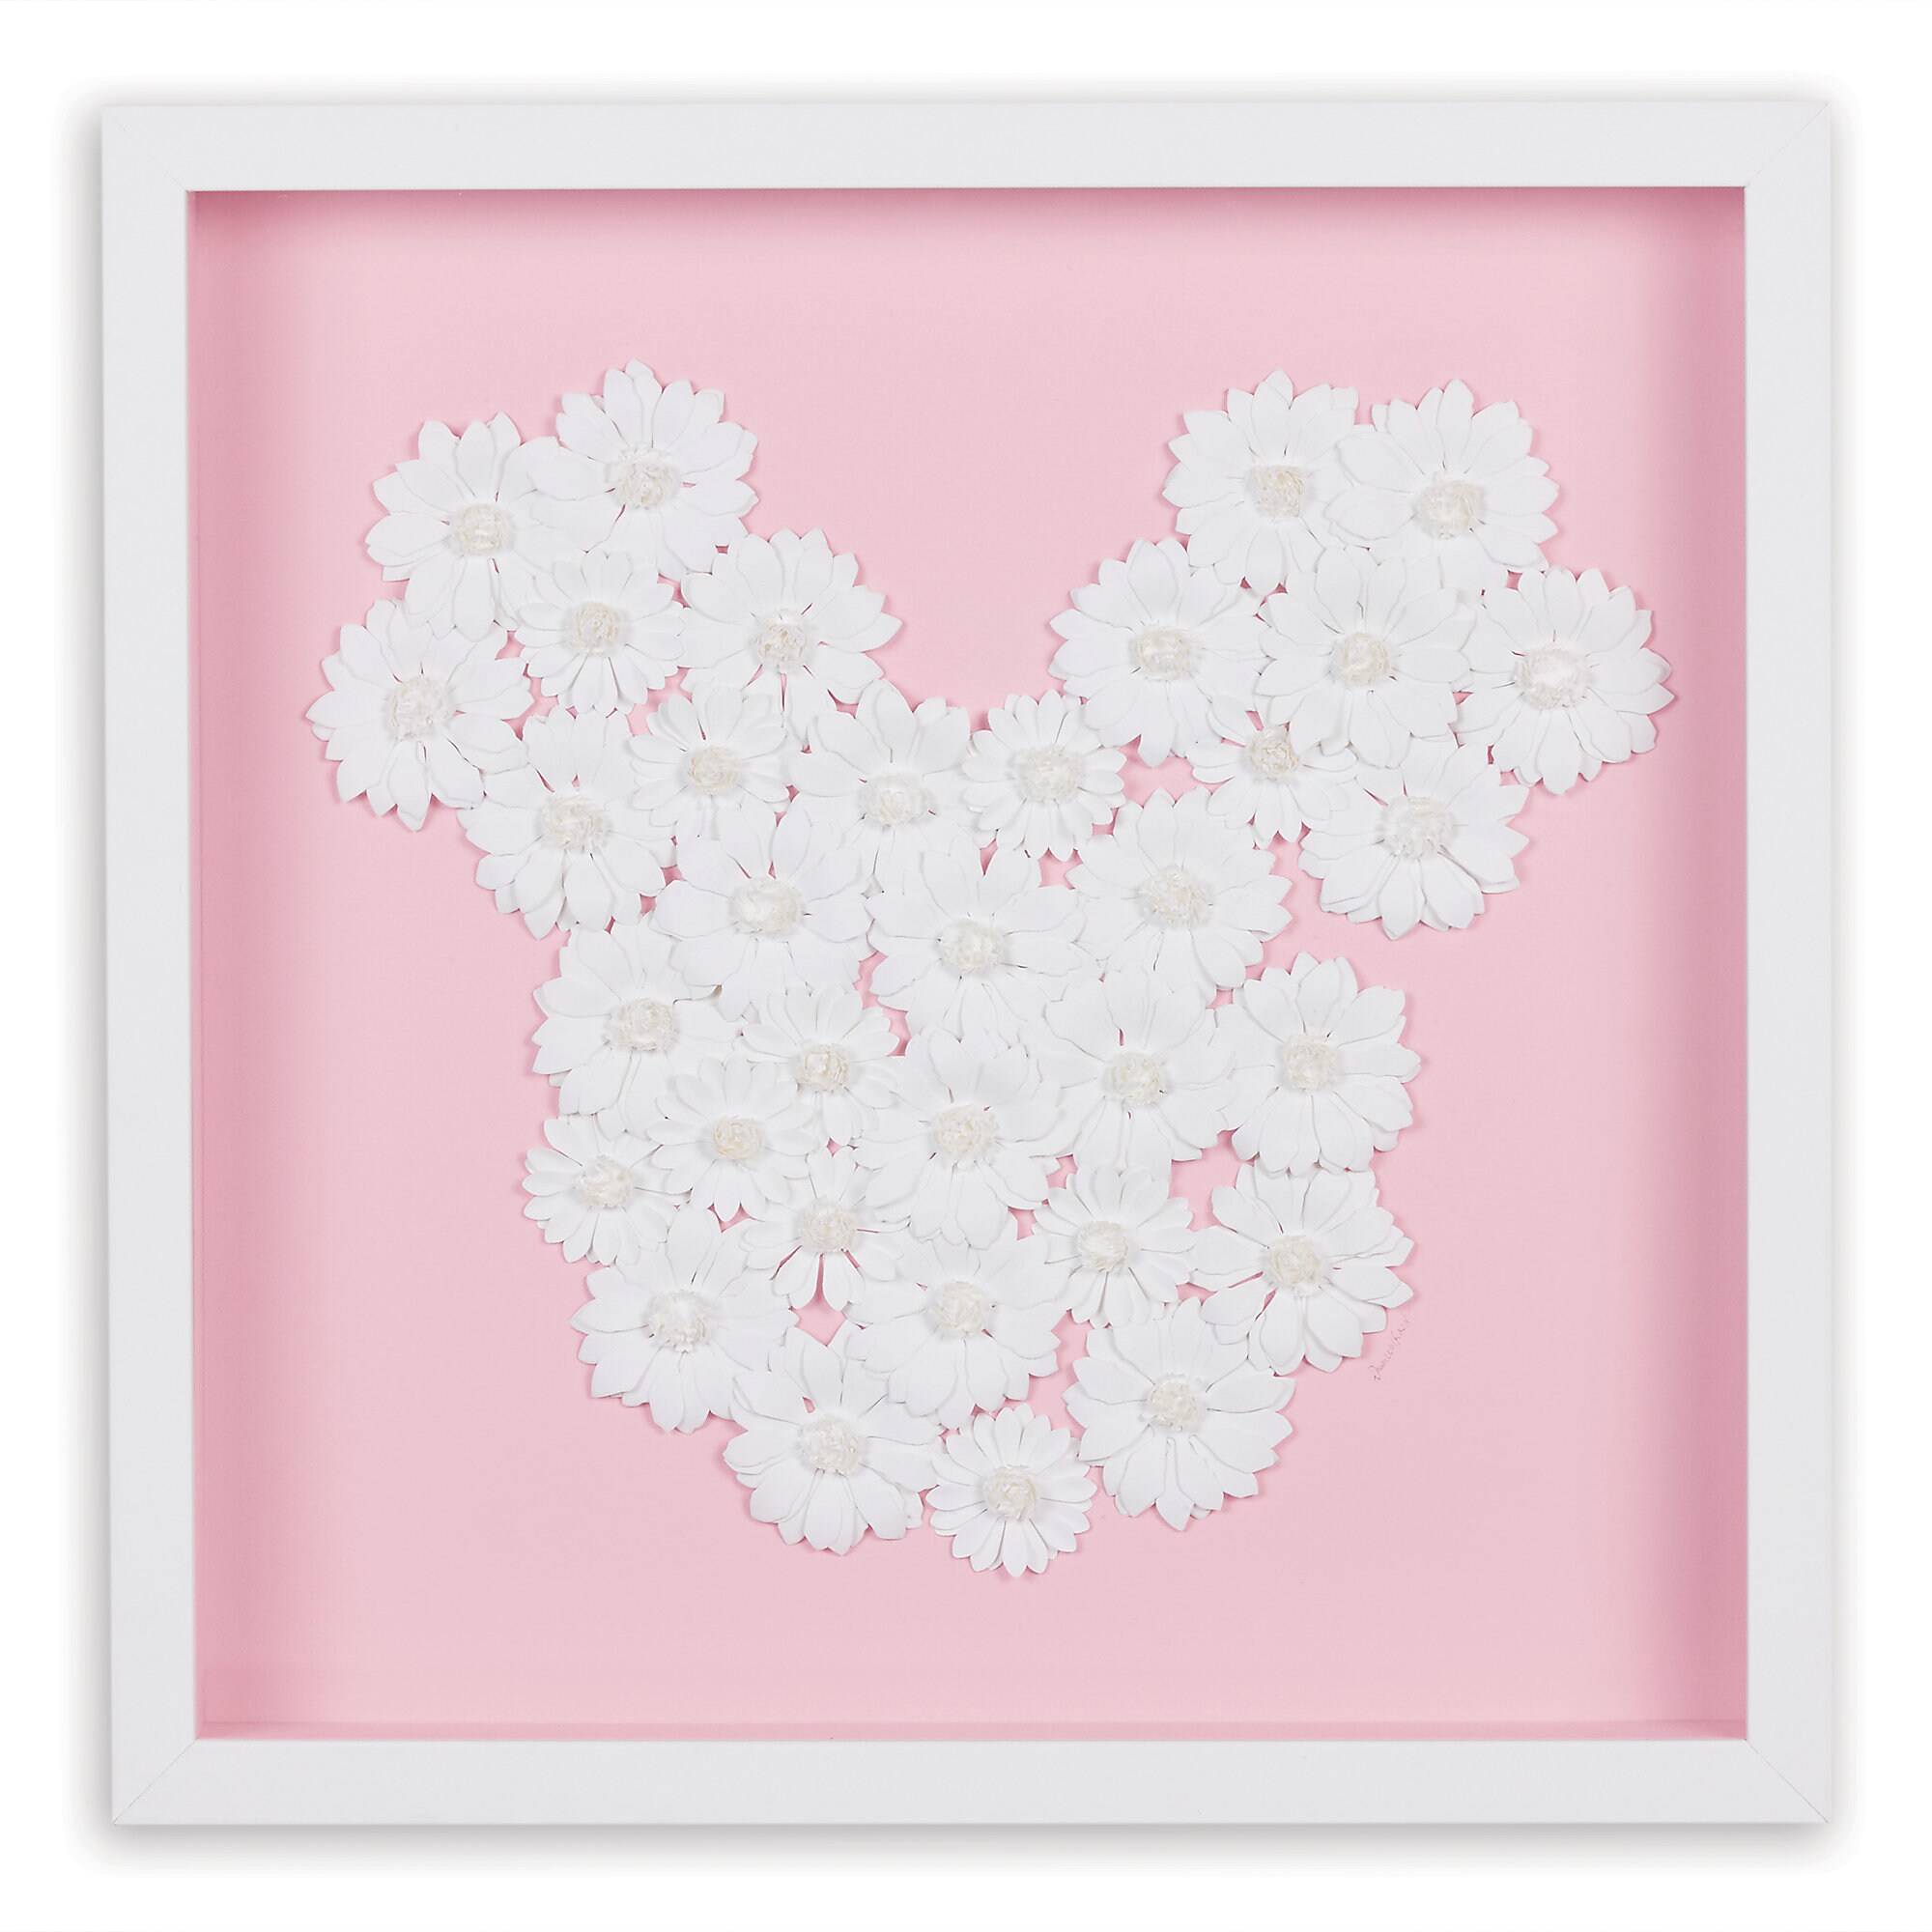 Mickey Mouse ''Daisy Dreams Paper Art'' by Ethan Allen - Framed